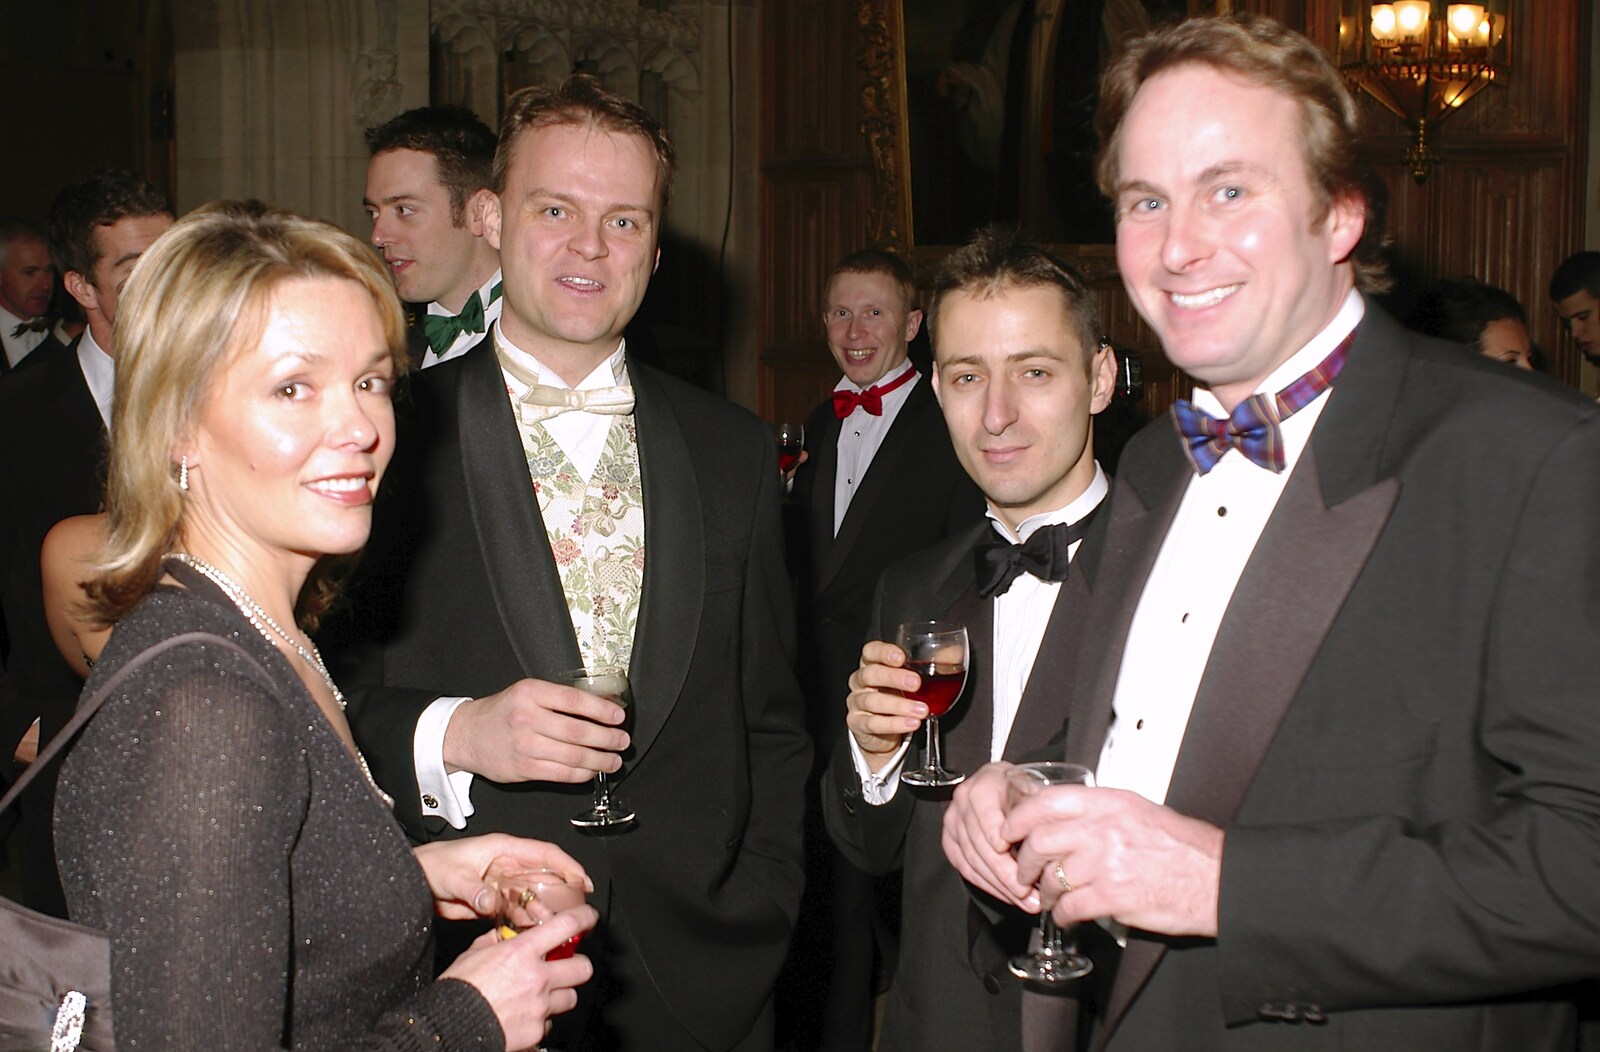 Nick, Ben and Peter Knowles from Qualcomm Cambridge's Christmas Do, King's College, Cambridge - 22nd December 2004